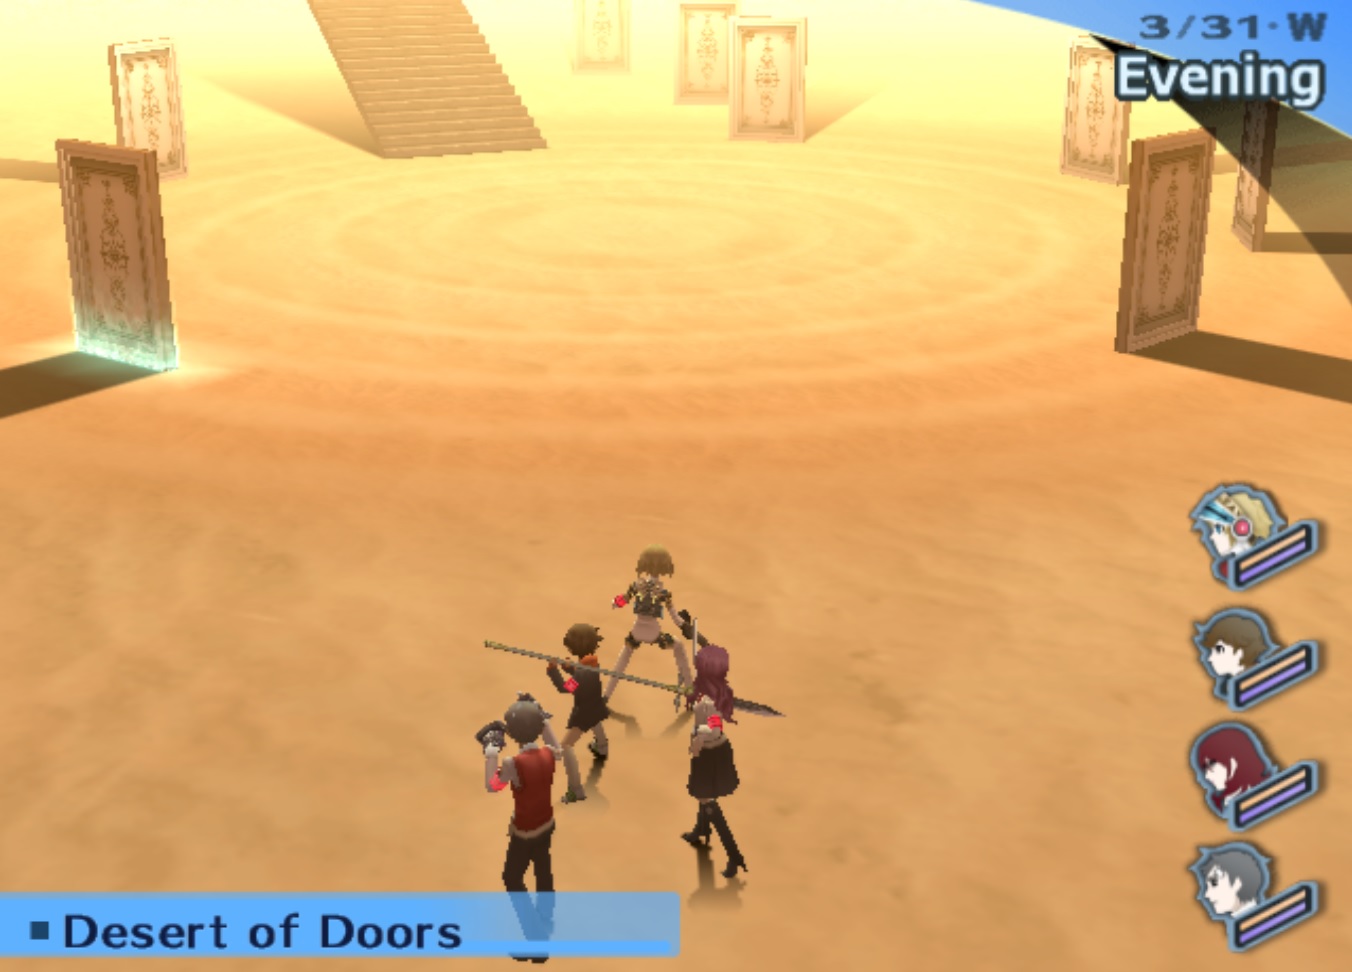 The Abyss of Time Sea of Doors